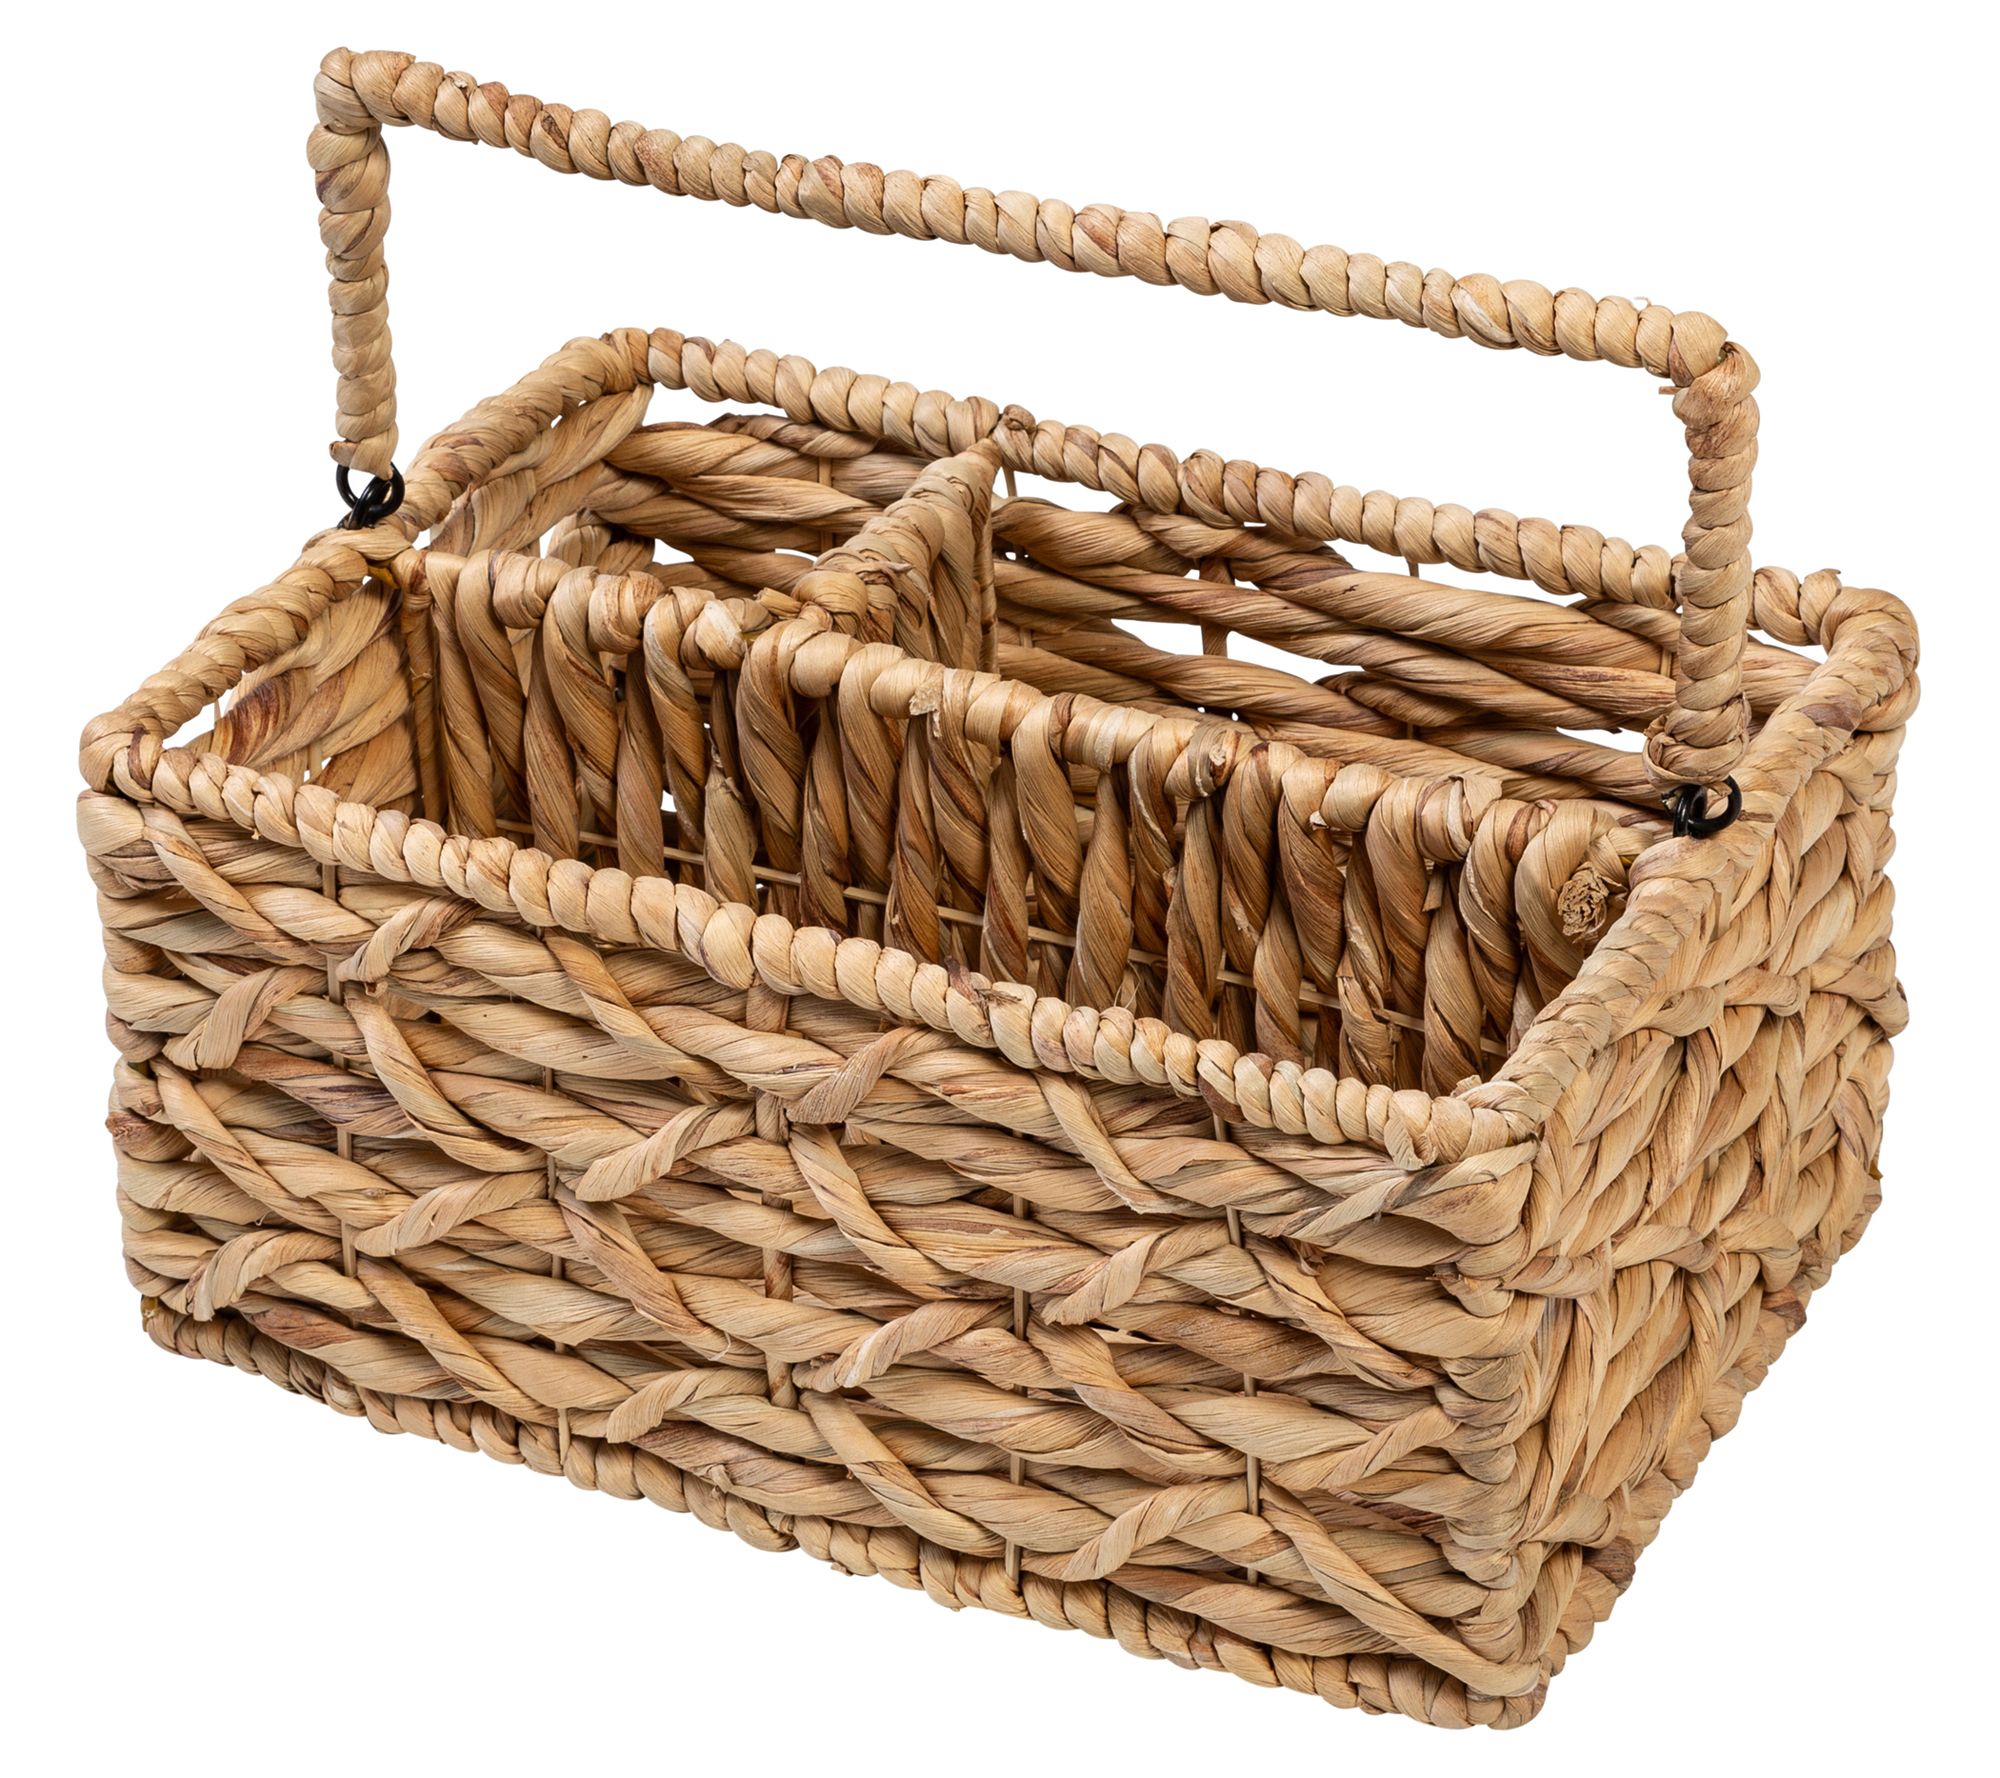 Best Buy: Honey-Can-Do 7-Piece Water Hyacinth Woven Bathroom